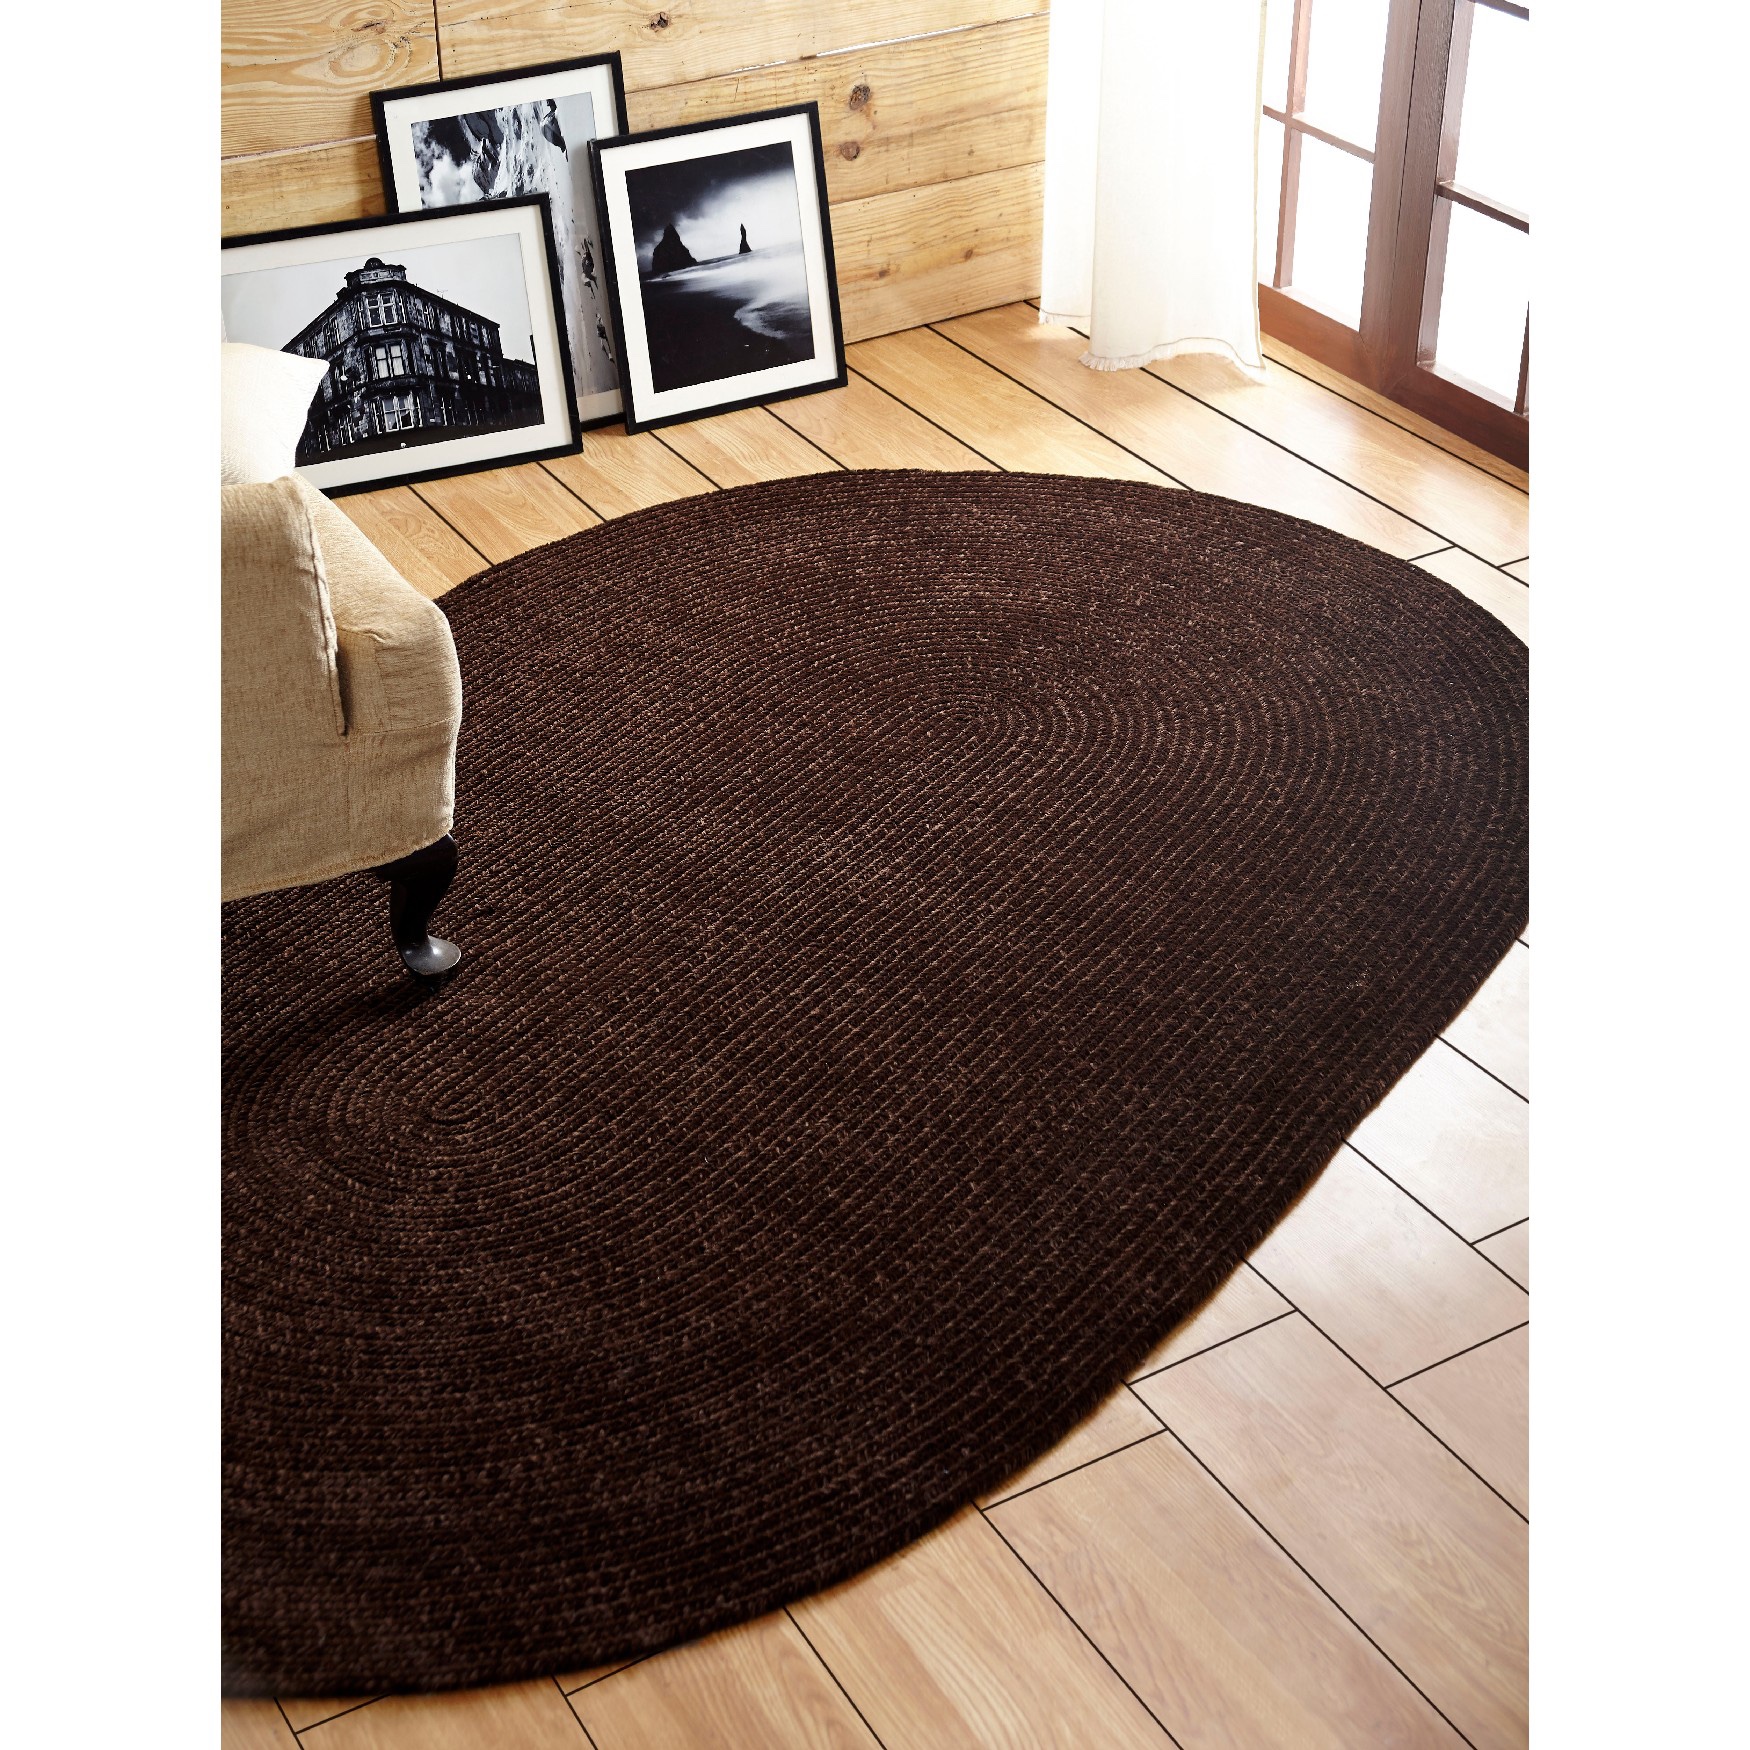 Better Trends Chenille Solid Braid Collection Reversible Indoor Area Utility Rug in Vibrant Colors, Oval, 